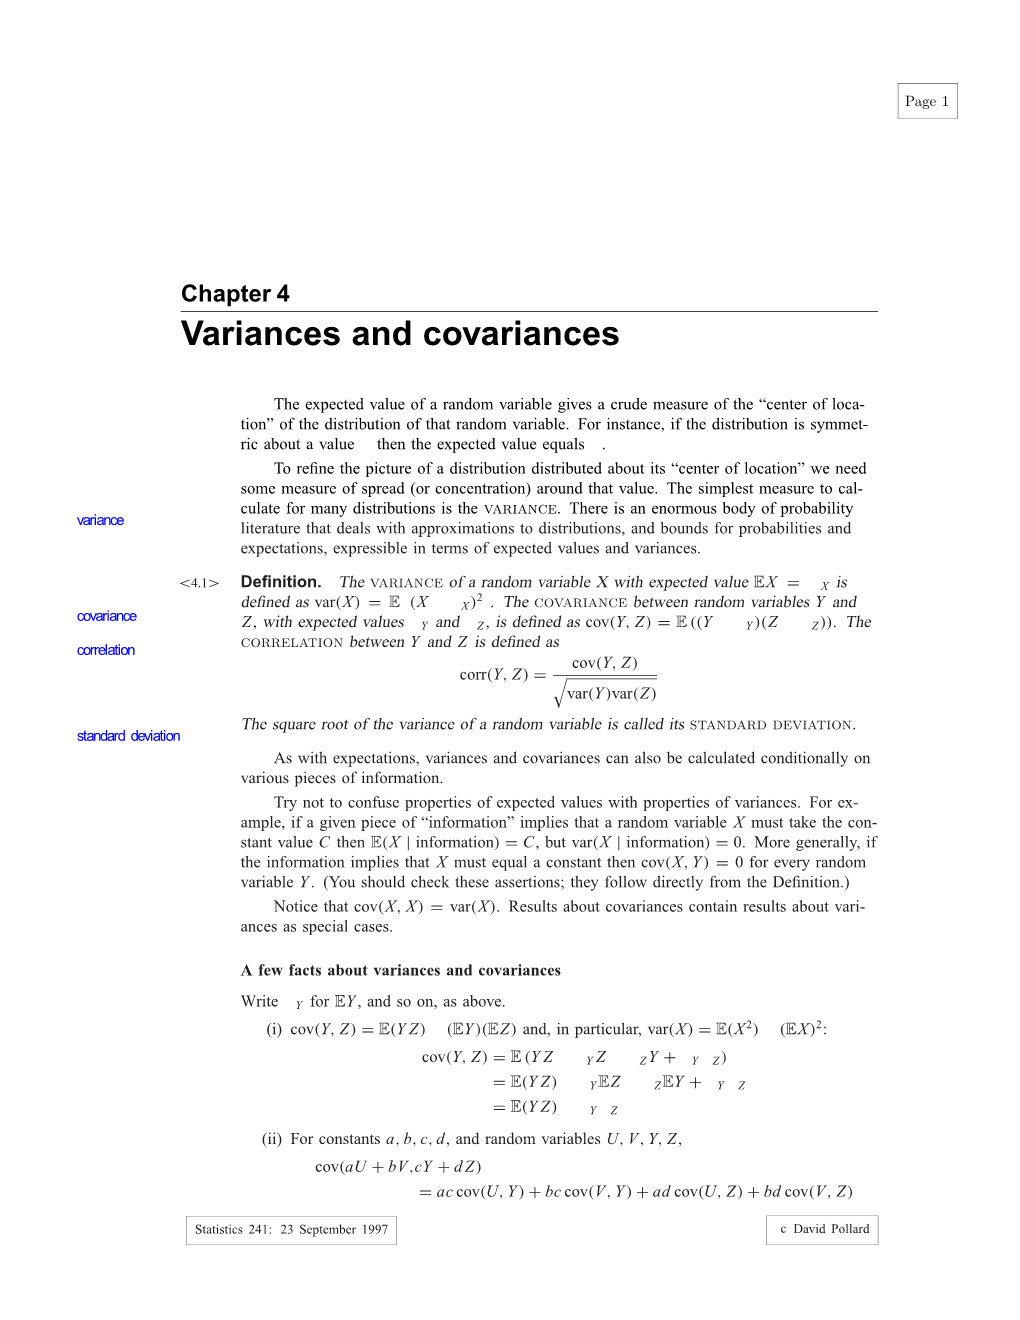 Variances and Covariances